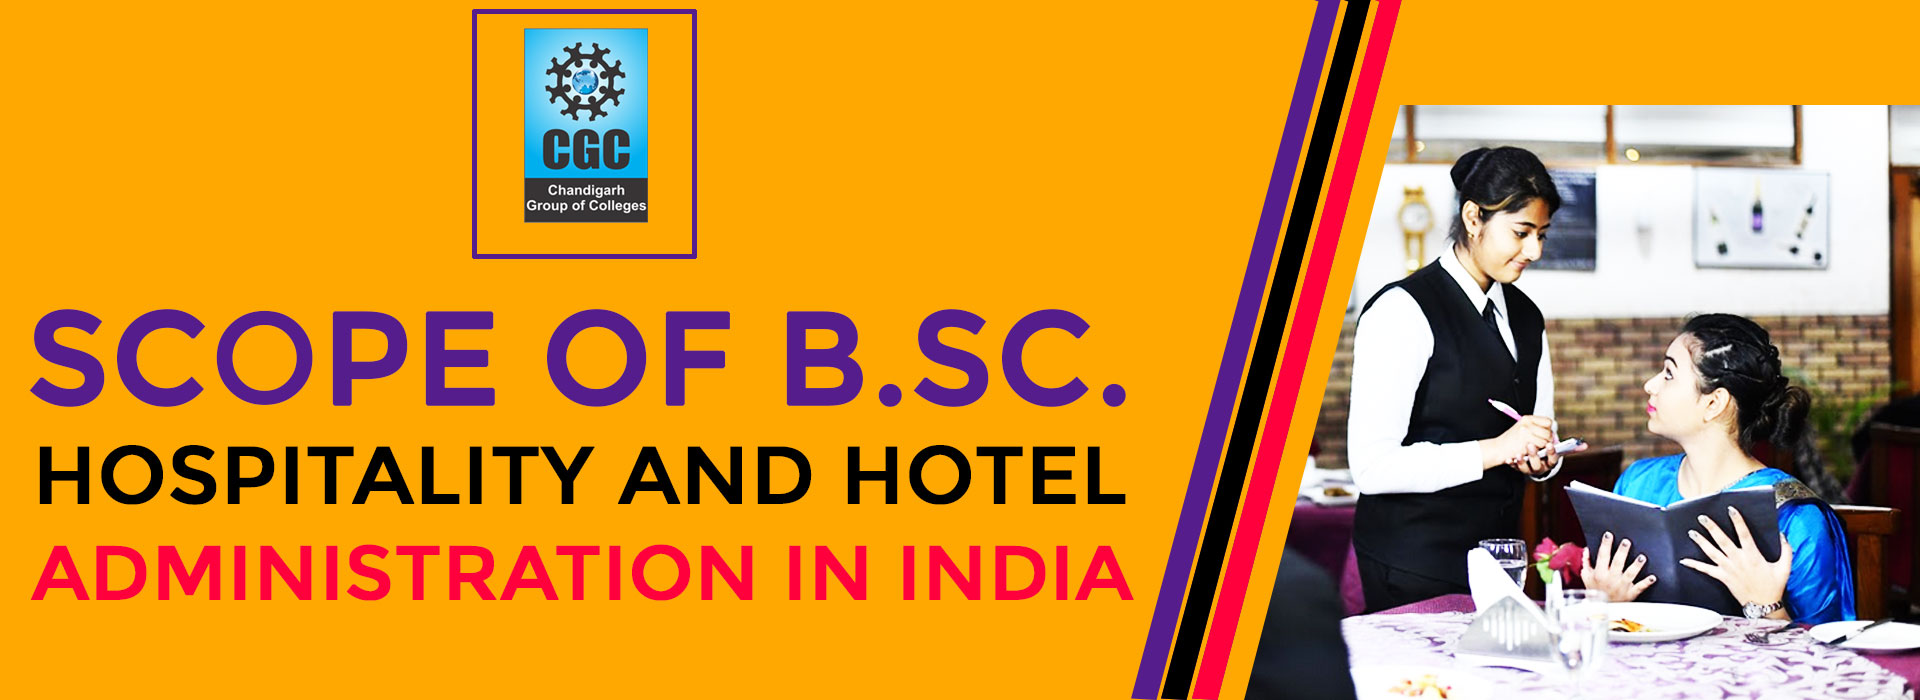 Scope of B.Sc. Hospitality and Hotel Administration in India 